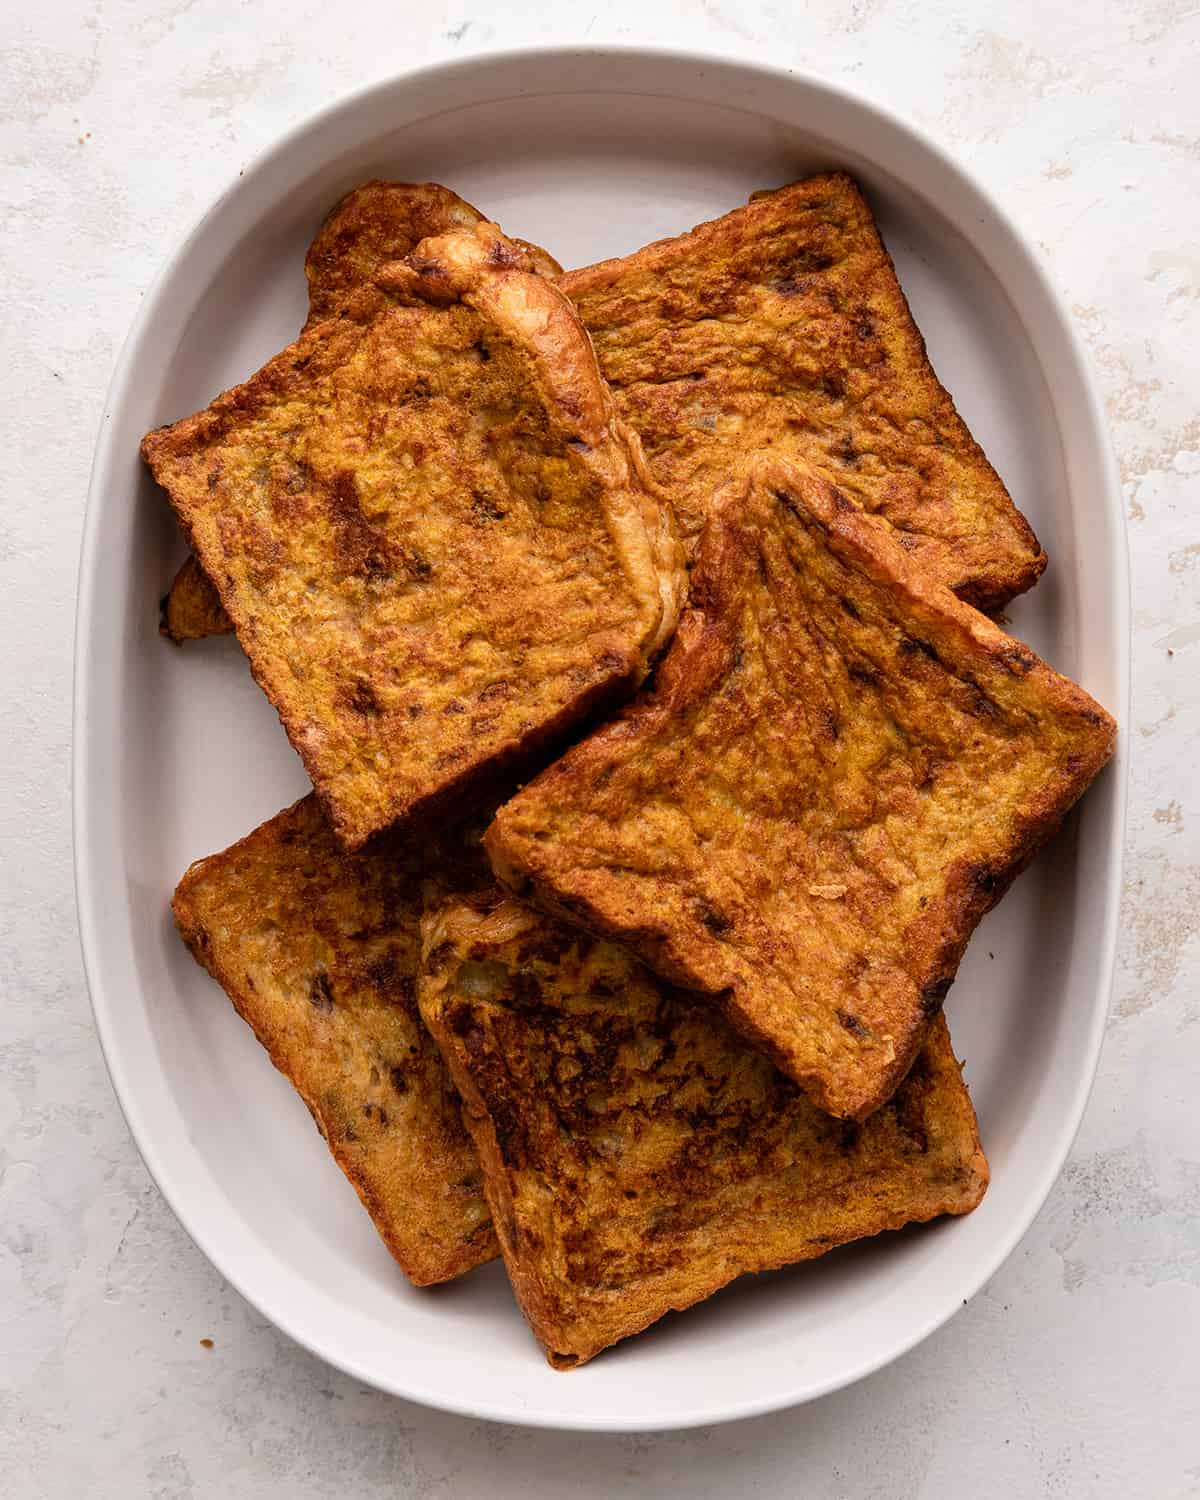 6 slices of Pumpkin French Toast in a baking dish to keep warm